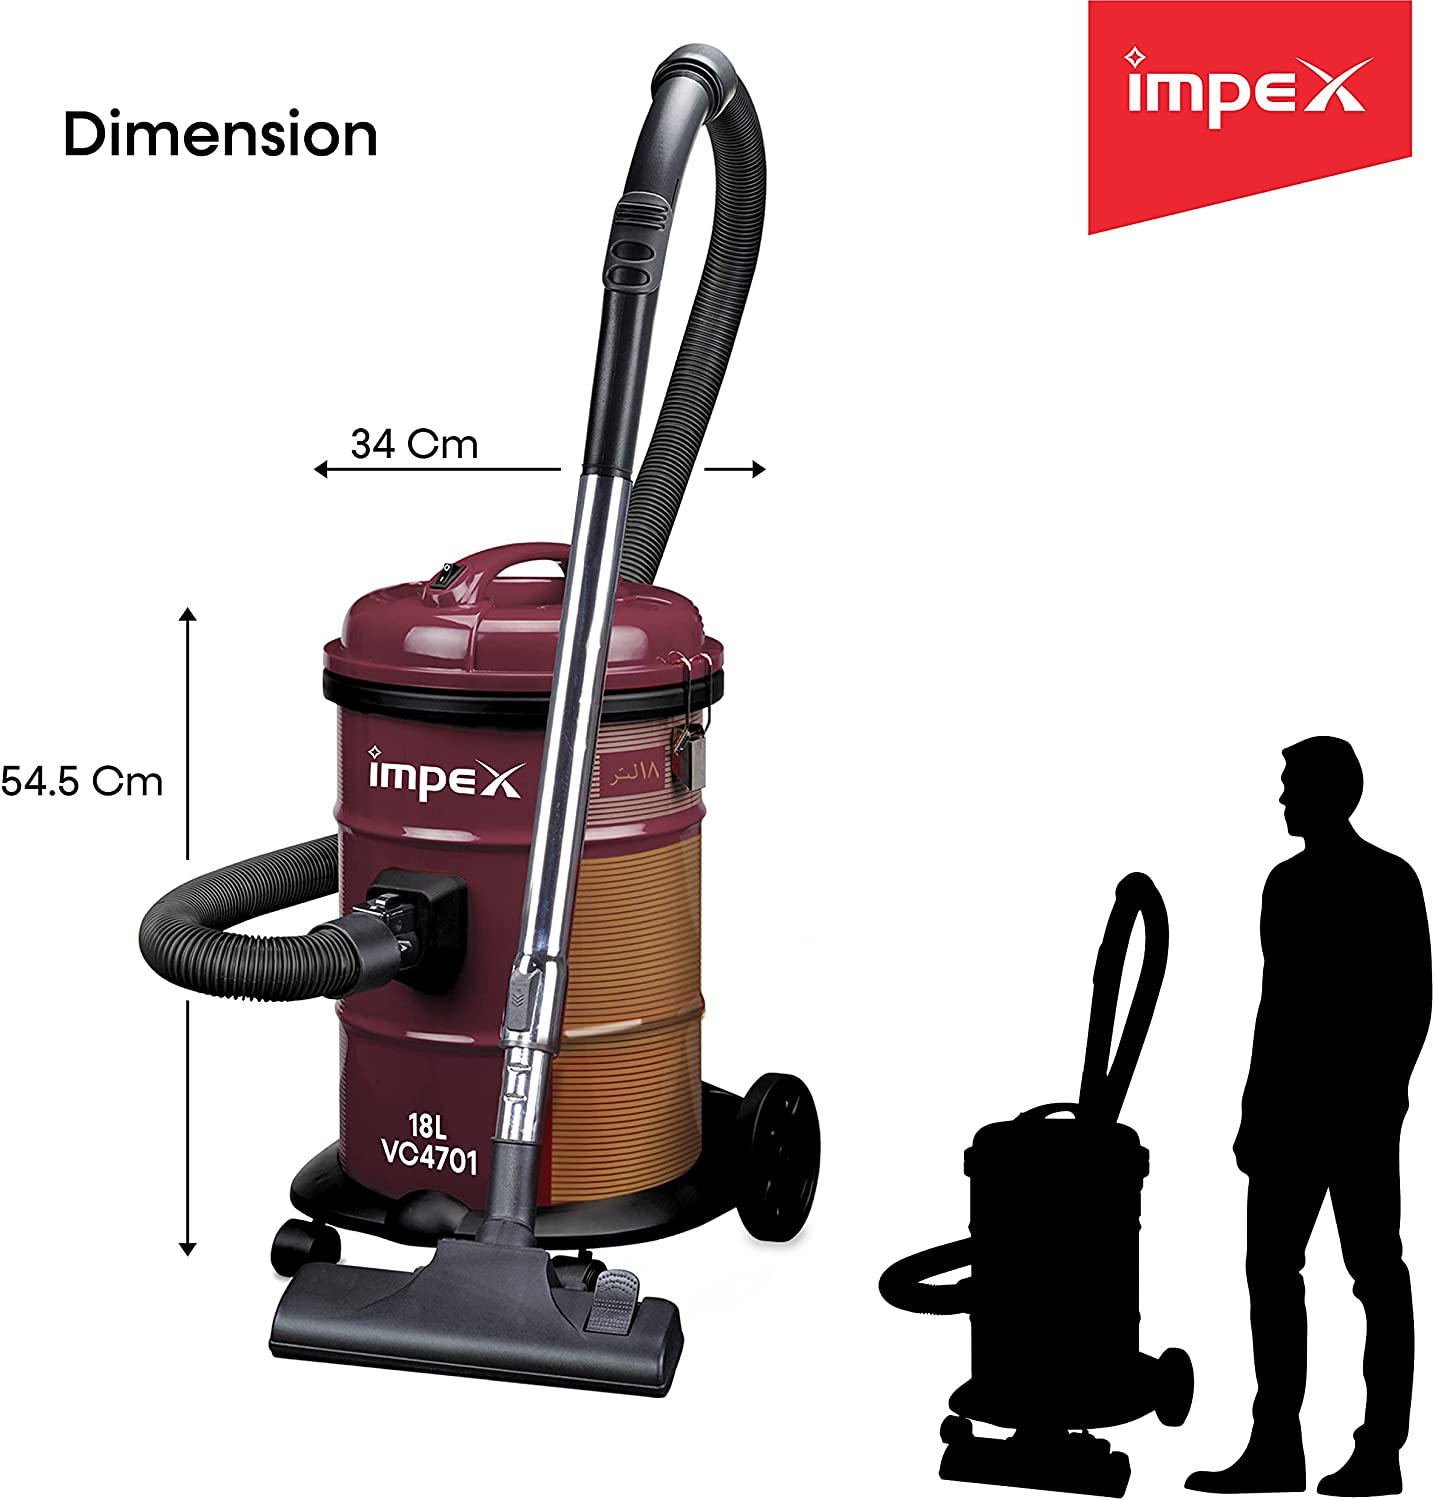 Impex VC 4701 1600W Vaccum Cleaner Blower function Telescopic metal tube Low noise level Convenient carrying handle